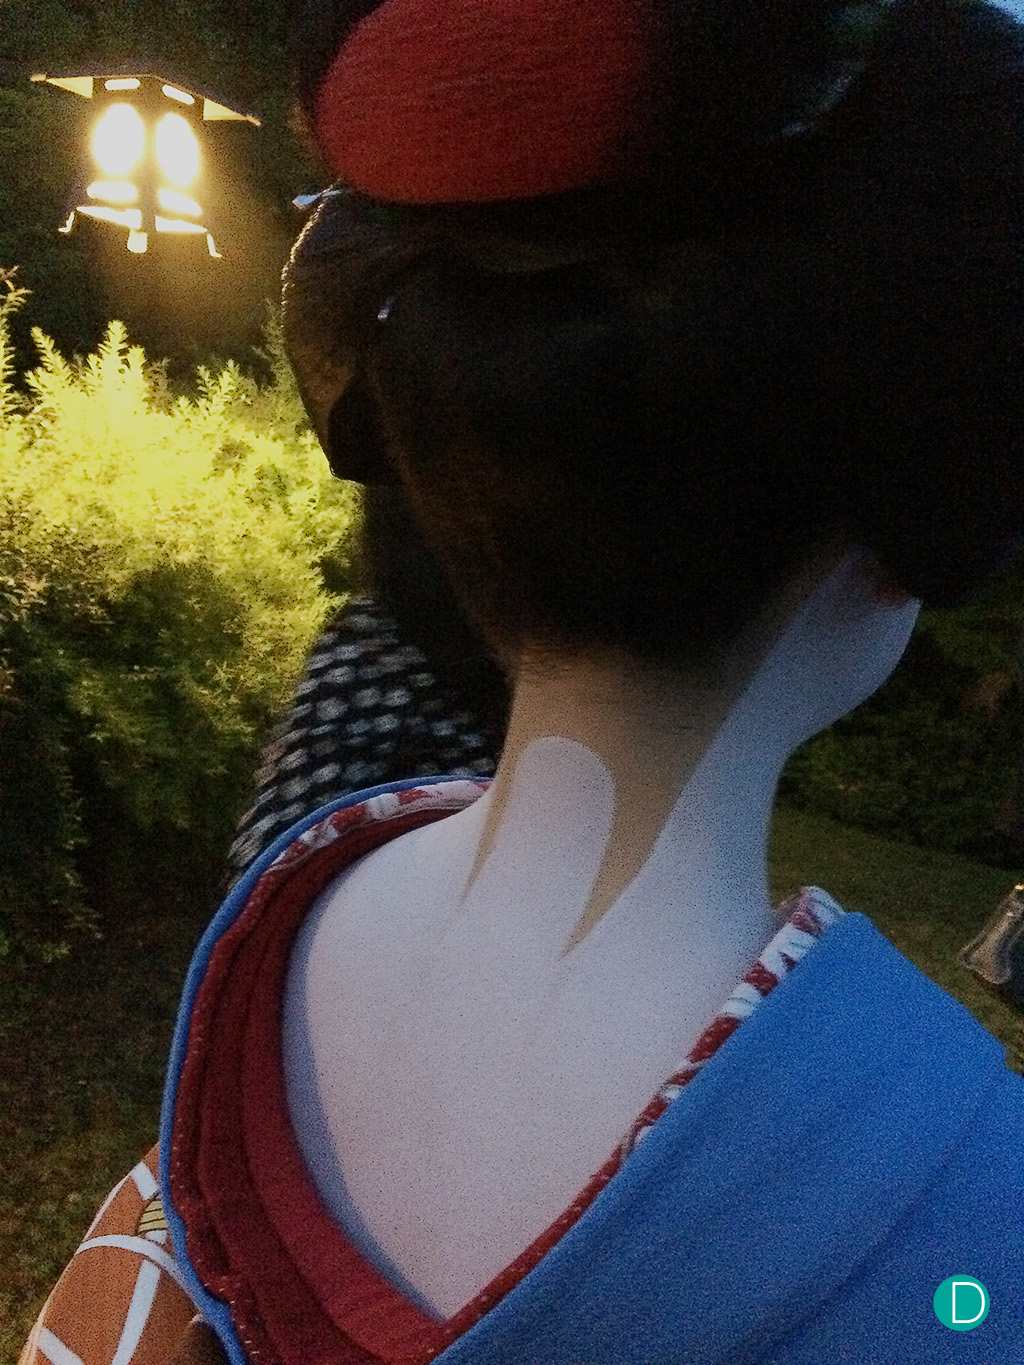 The mark of a Maiko.